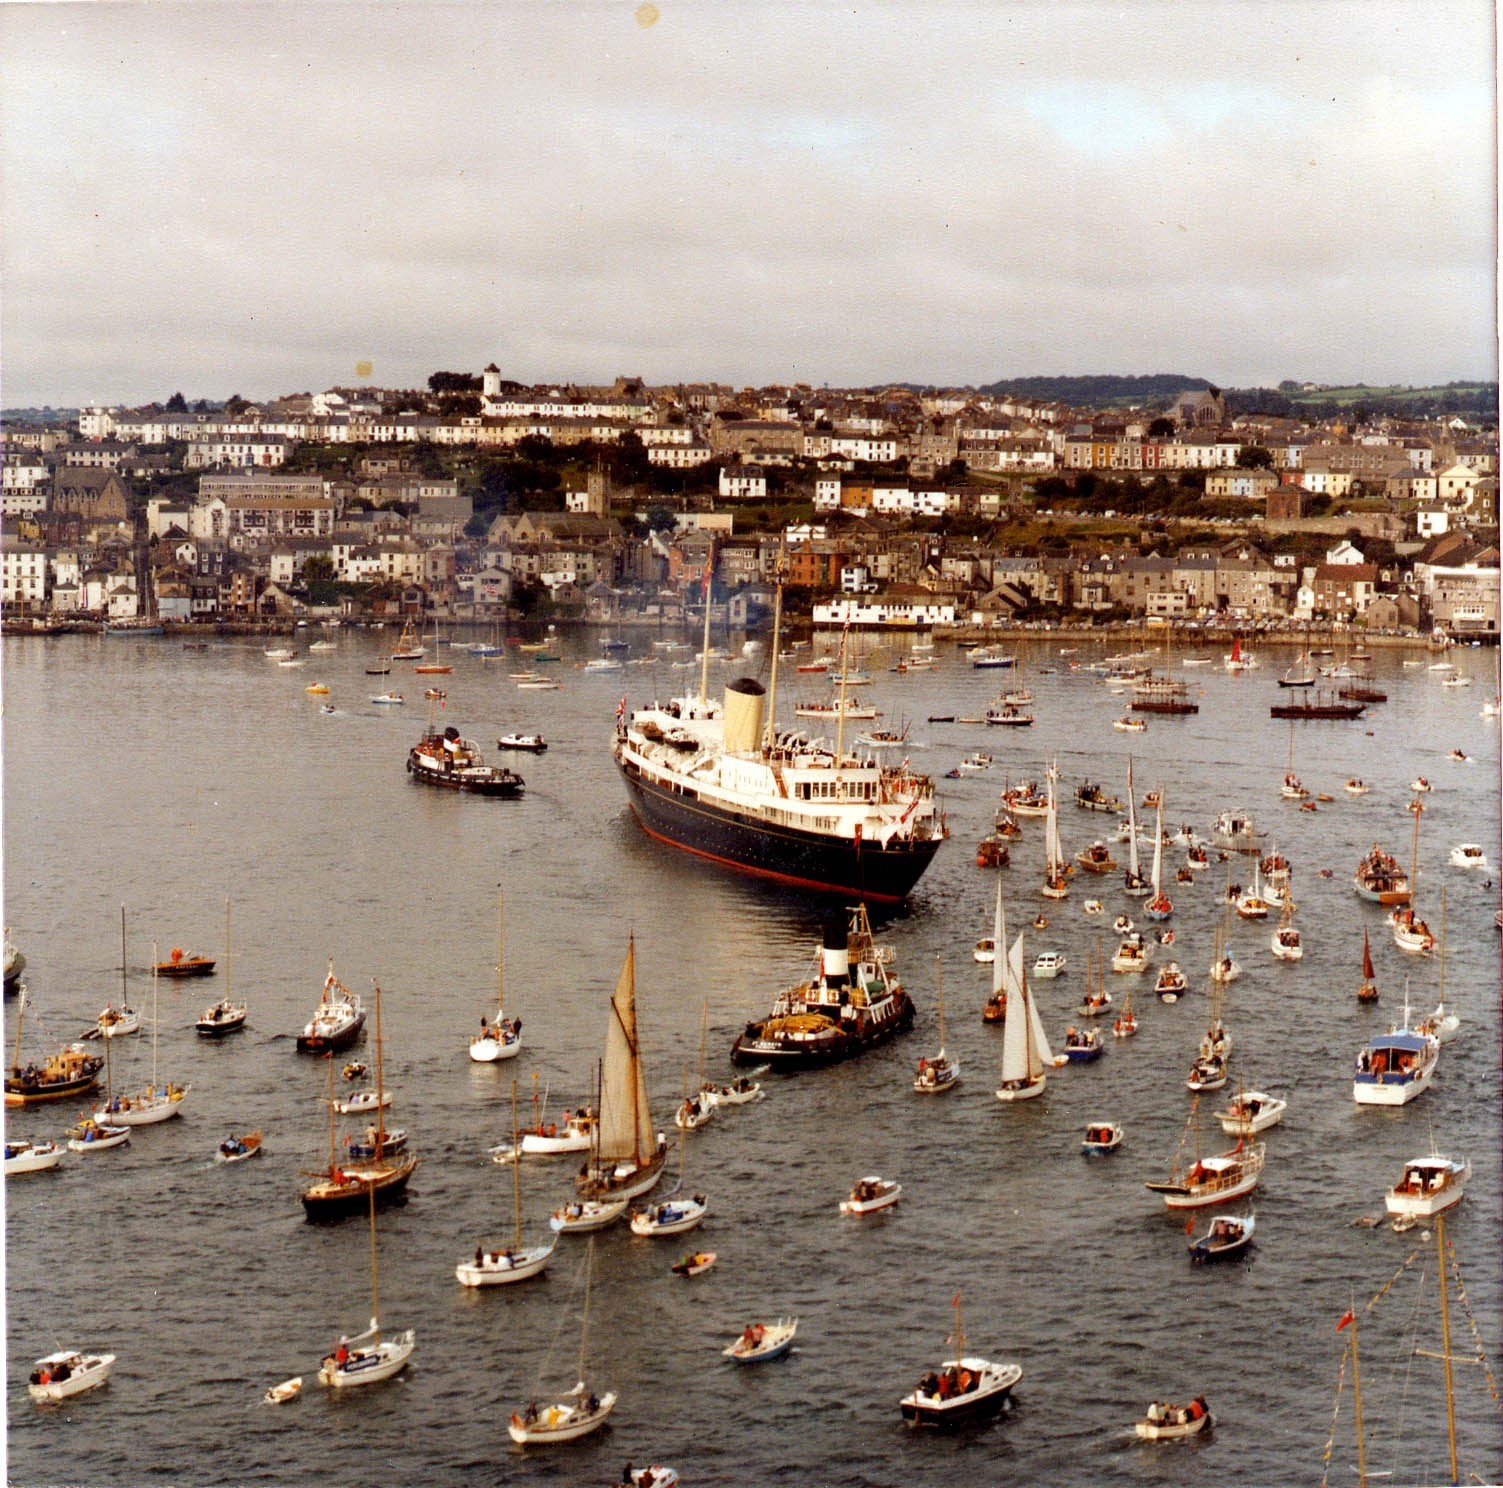 The Queen arrives in Falmouth on Britannia for the 1977 Silver Jubilee Picture: David Barnicoat Collection